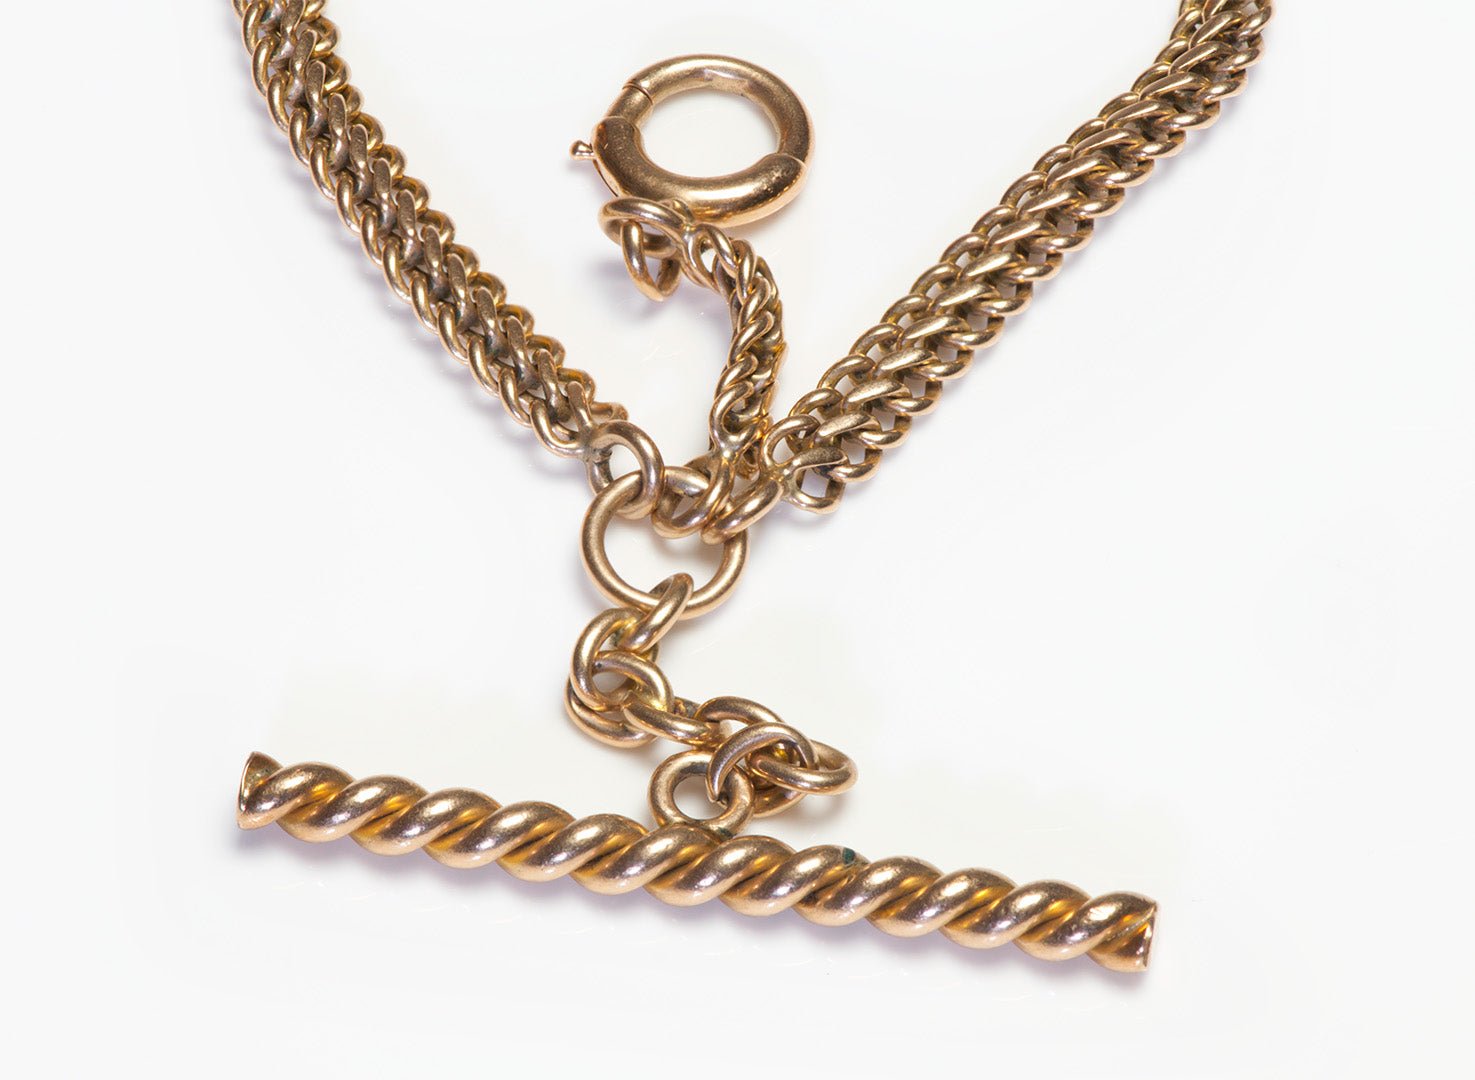 Antique Yellow Gold Watch Fob Chain and Bar